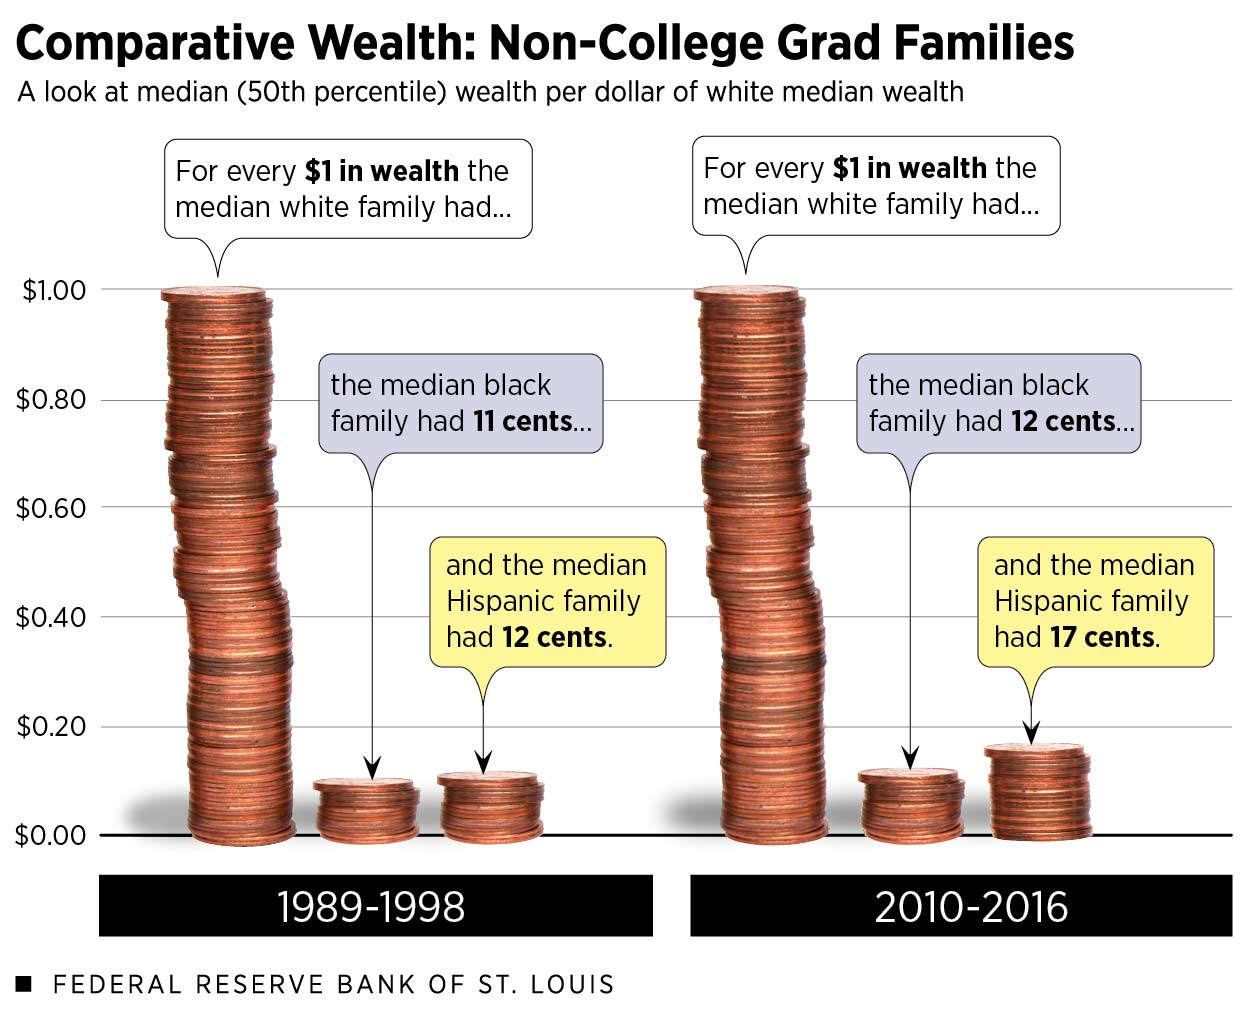 Racial Wealth Gap Large for Non-College Graduates: Infographic Shows Black, Hispanic & White Families (Details in article)